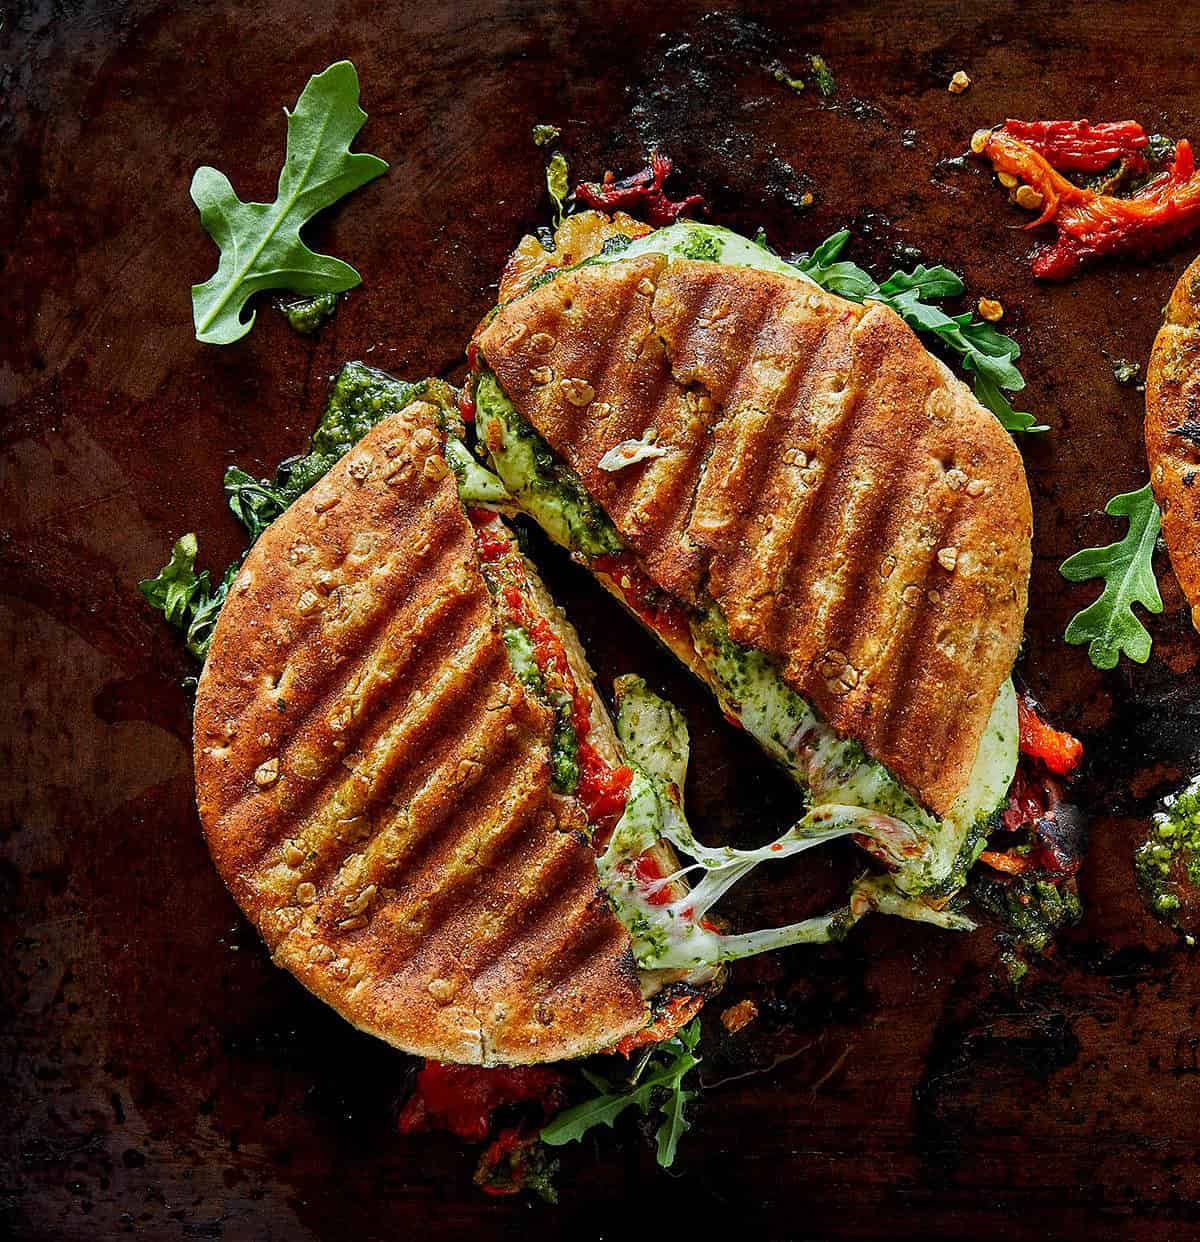  This sandwich might just be the definition of comfort food.